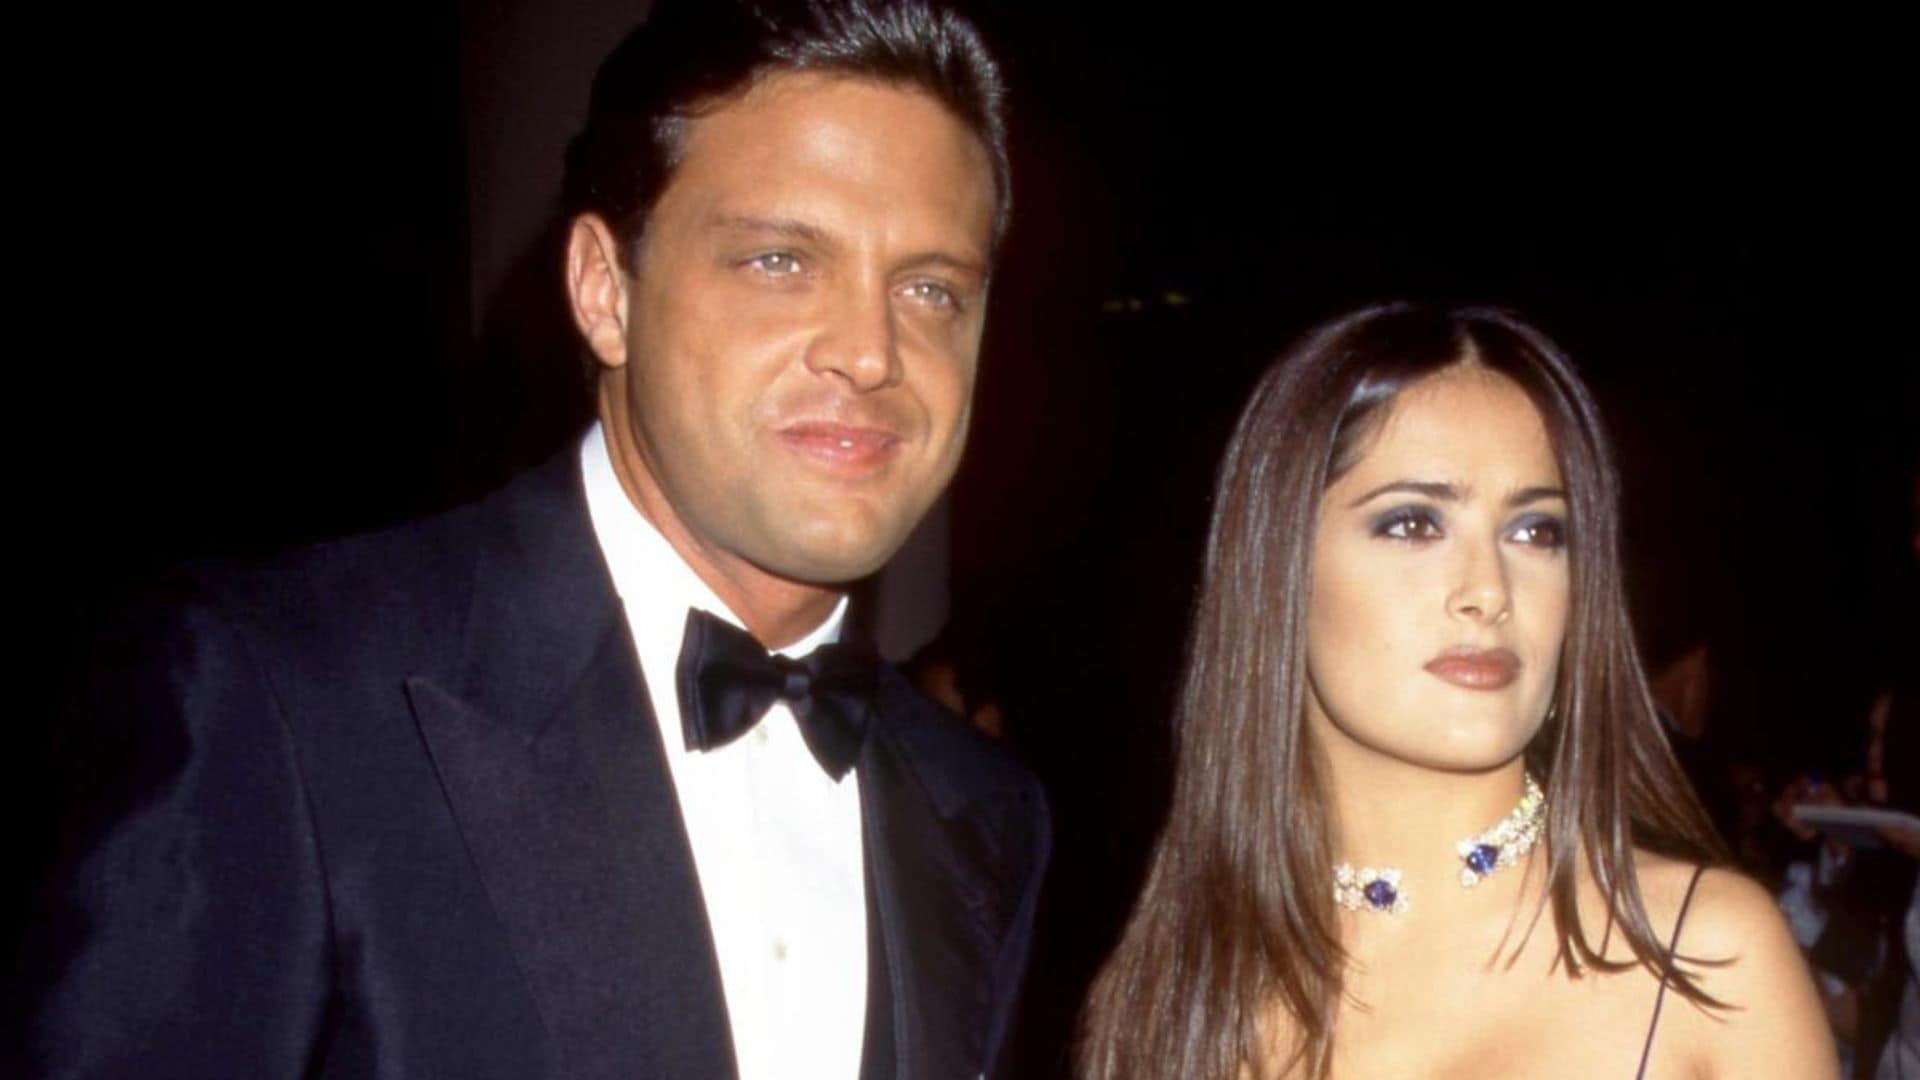 Salma Hayek celebrates Luis Miguel’s birthday with a throwback snap of the two